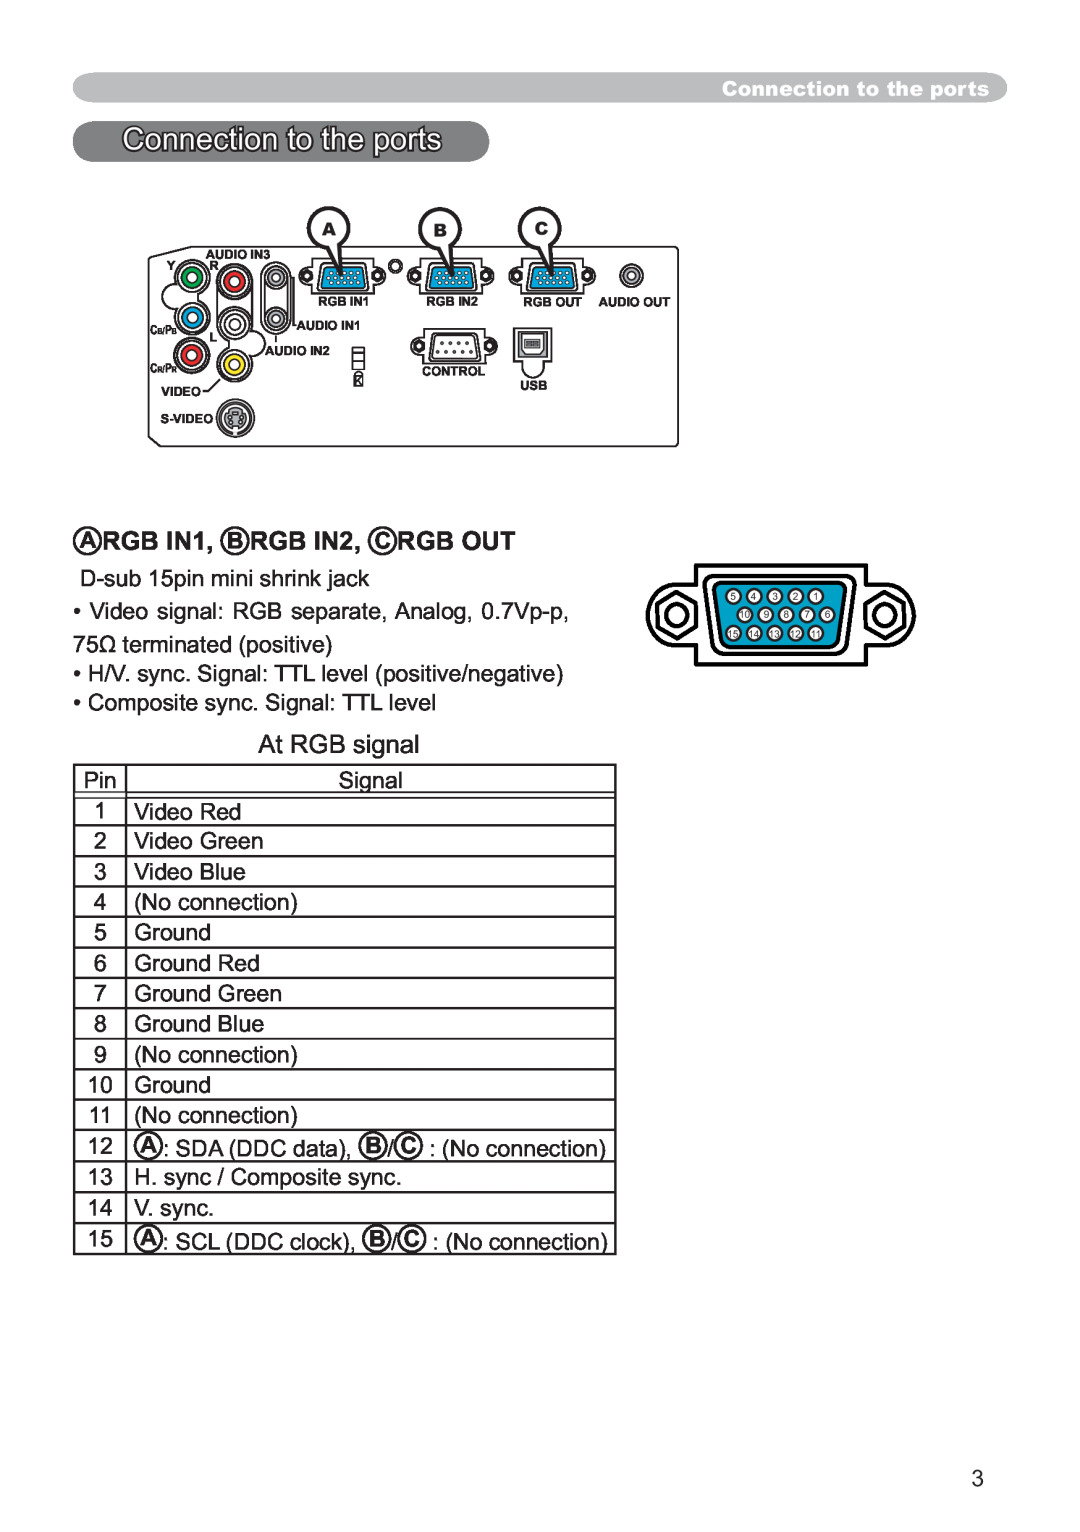 Hitachi ED-X12 user manual Connection to the ports, ARGB IN1, B RGB IN2, C RGB OUT 